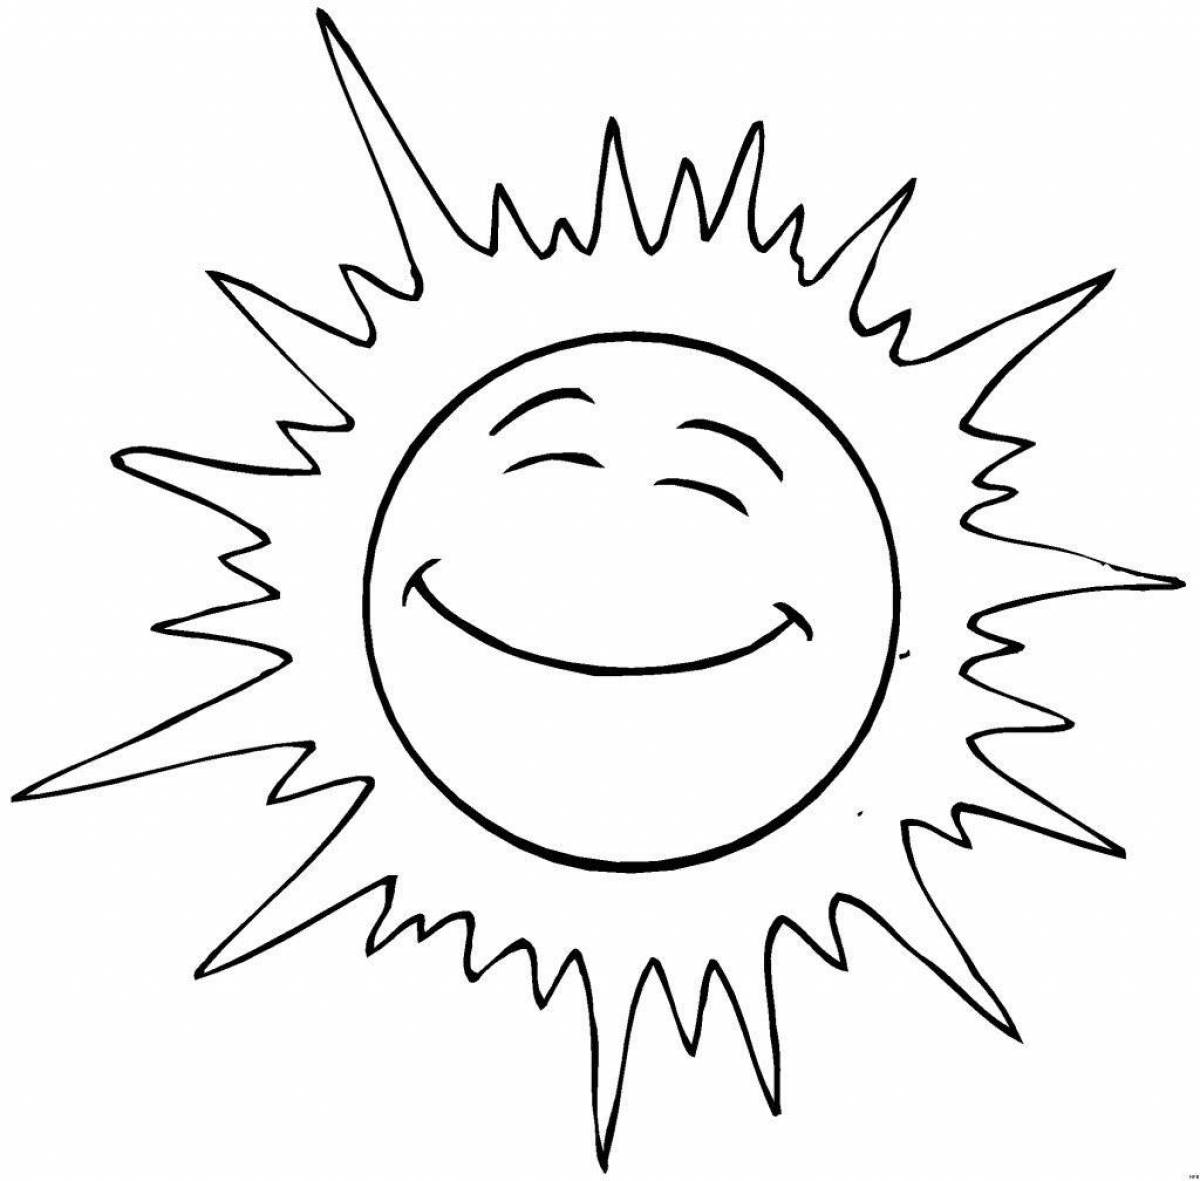 Large sun coloring book for kids